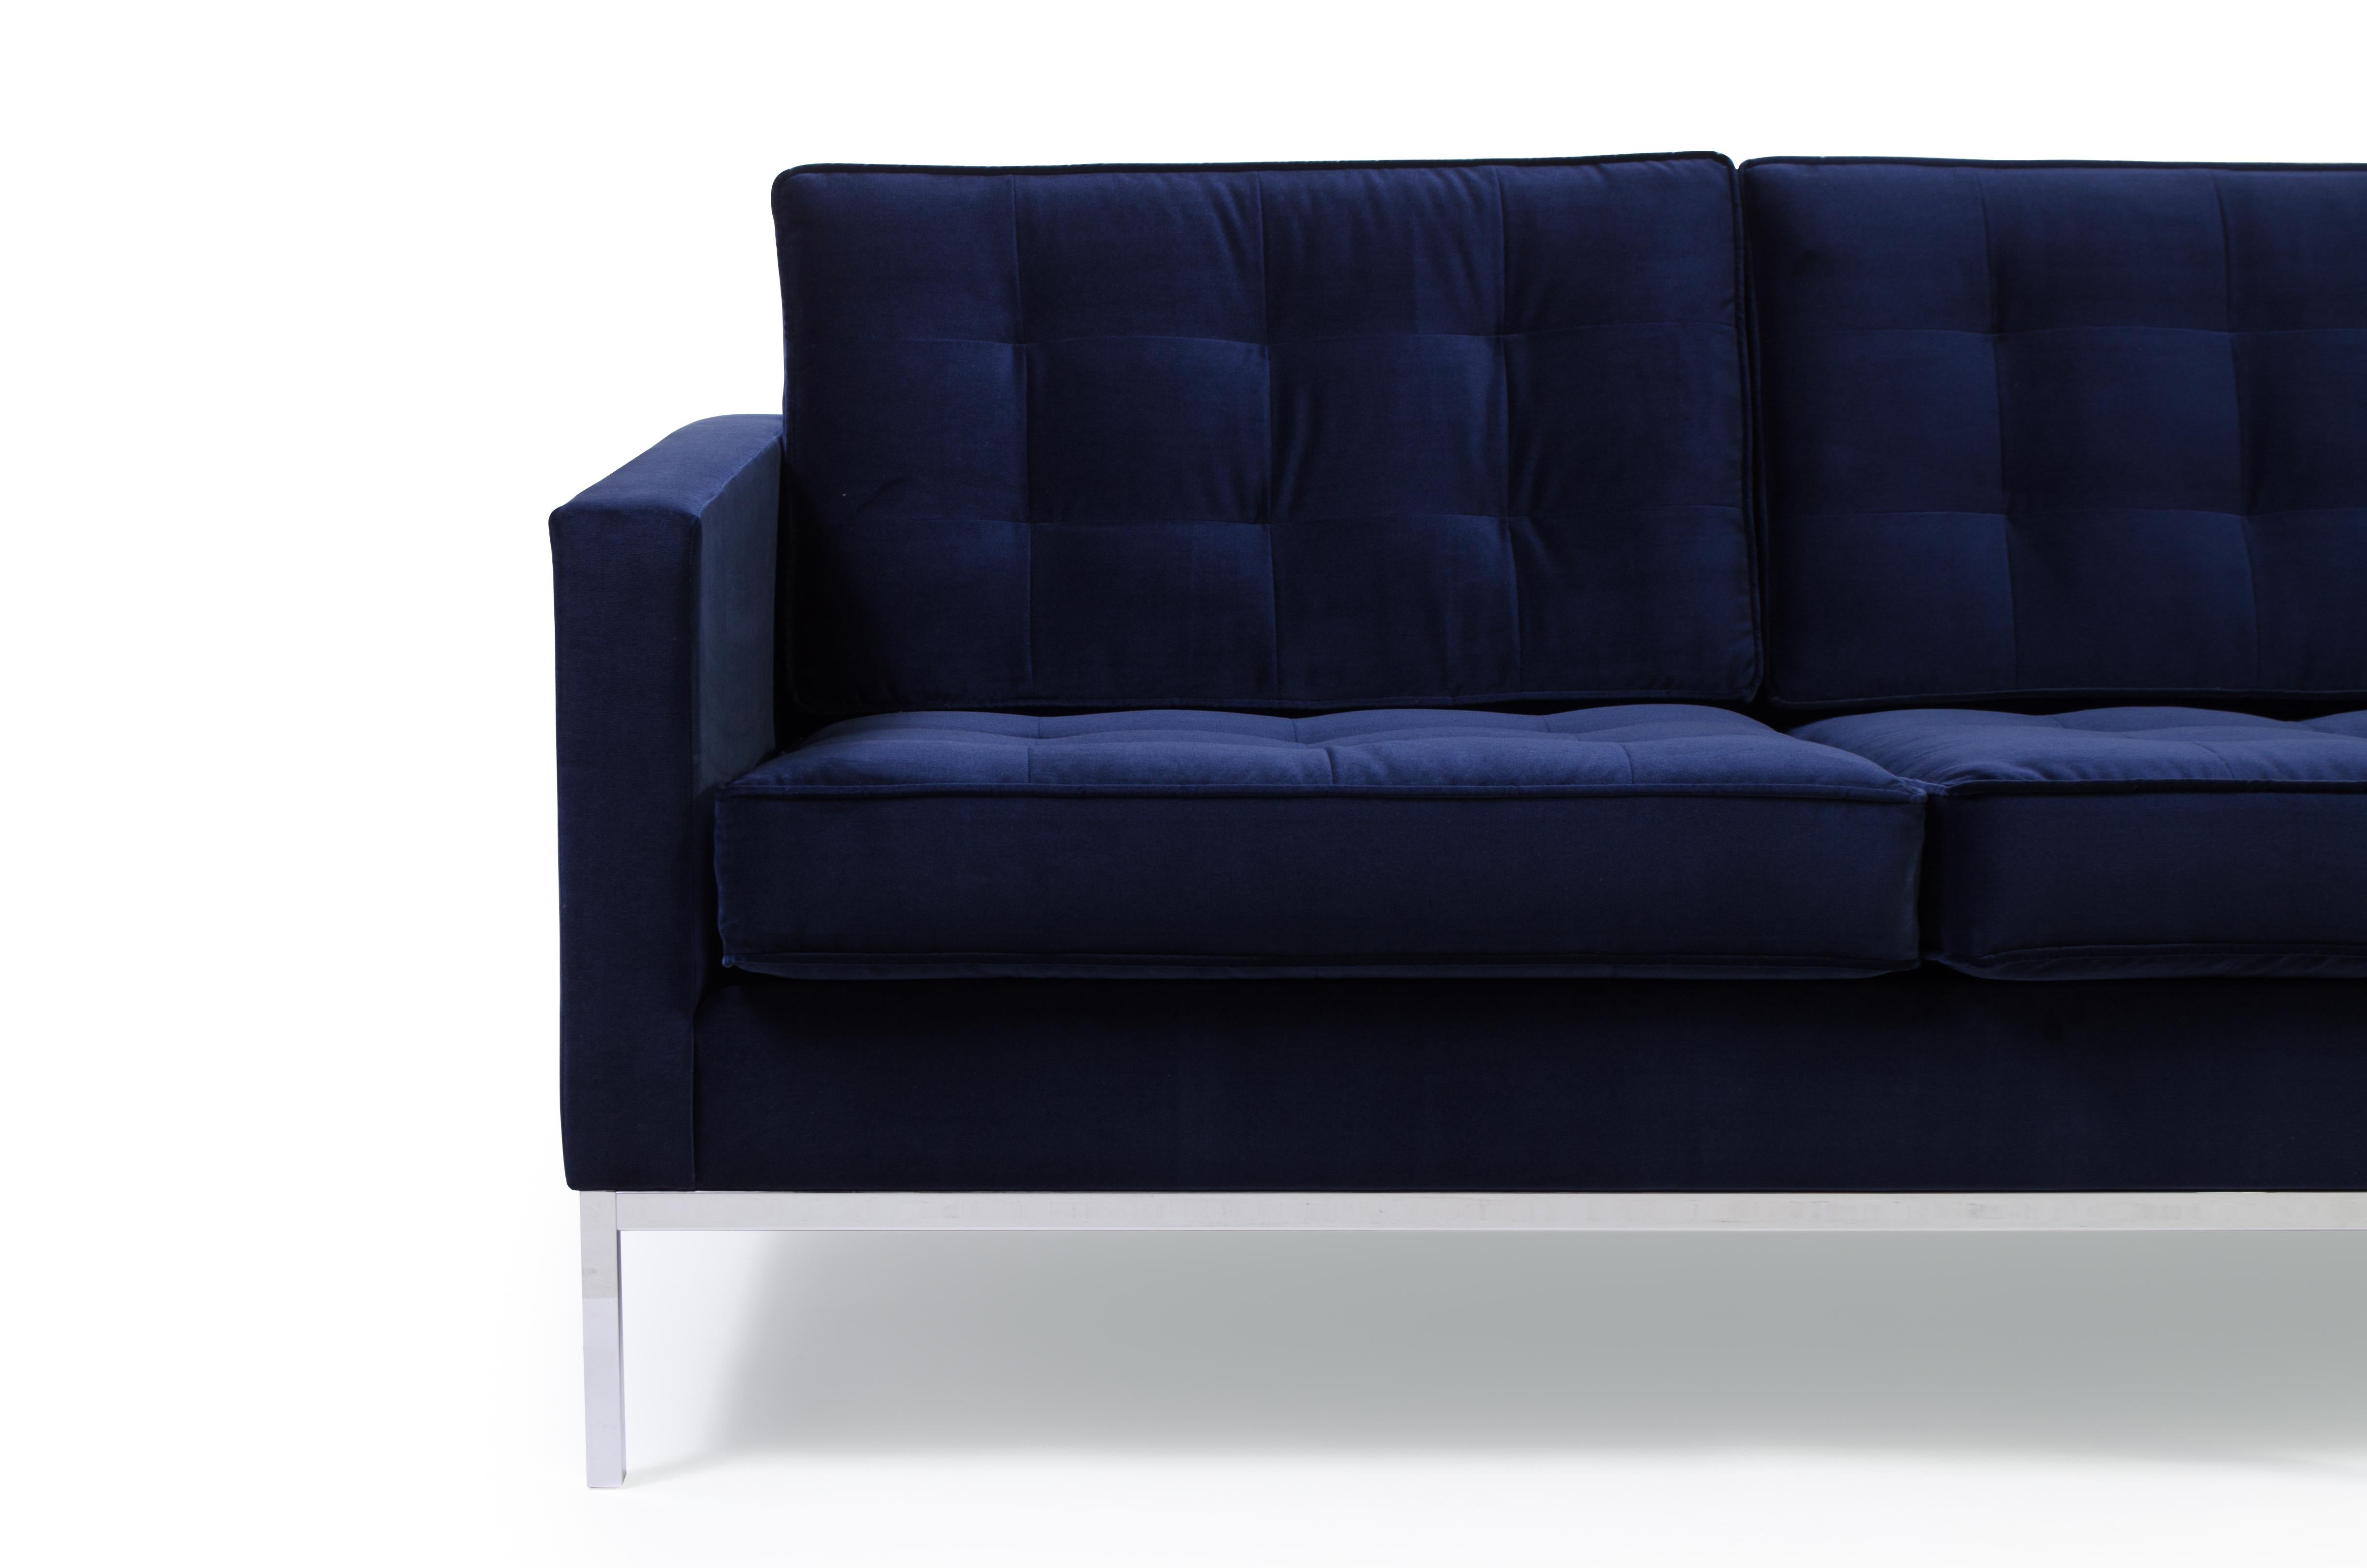 North American Florence Knoll Sofa in Navy Velvet